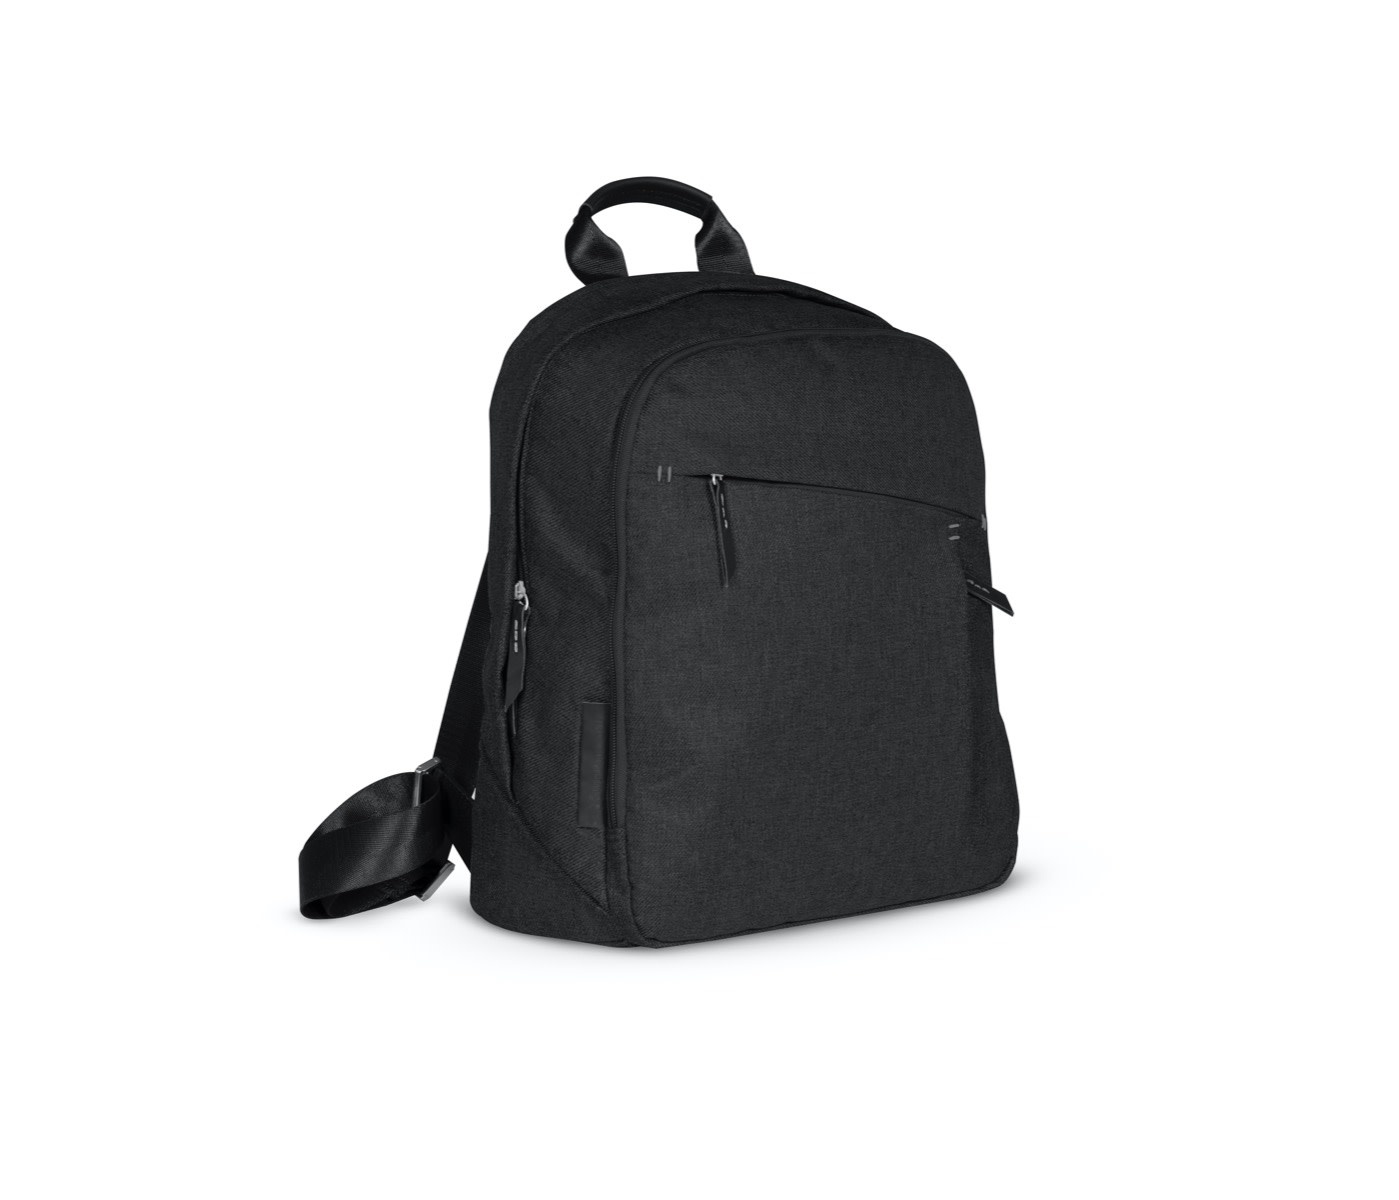 UPPABaby UPPAbaby Changing Backpack